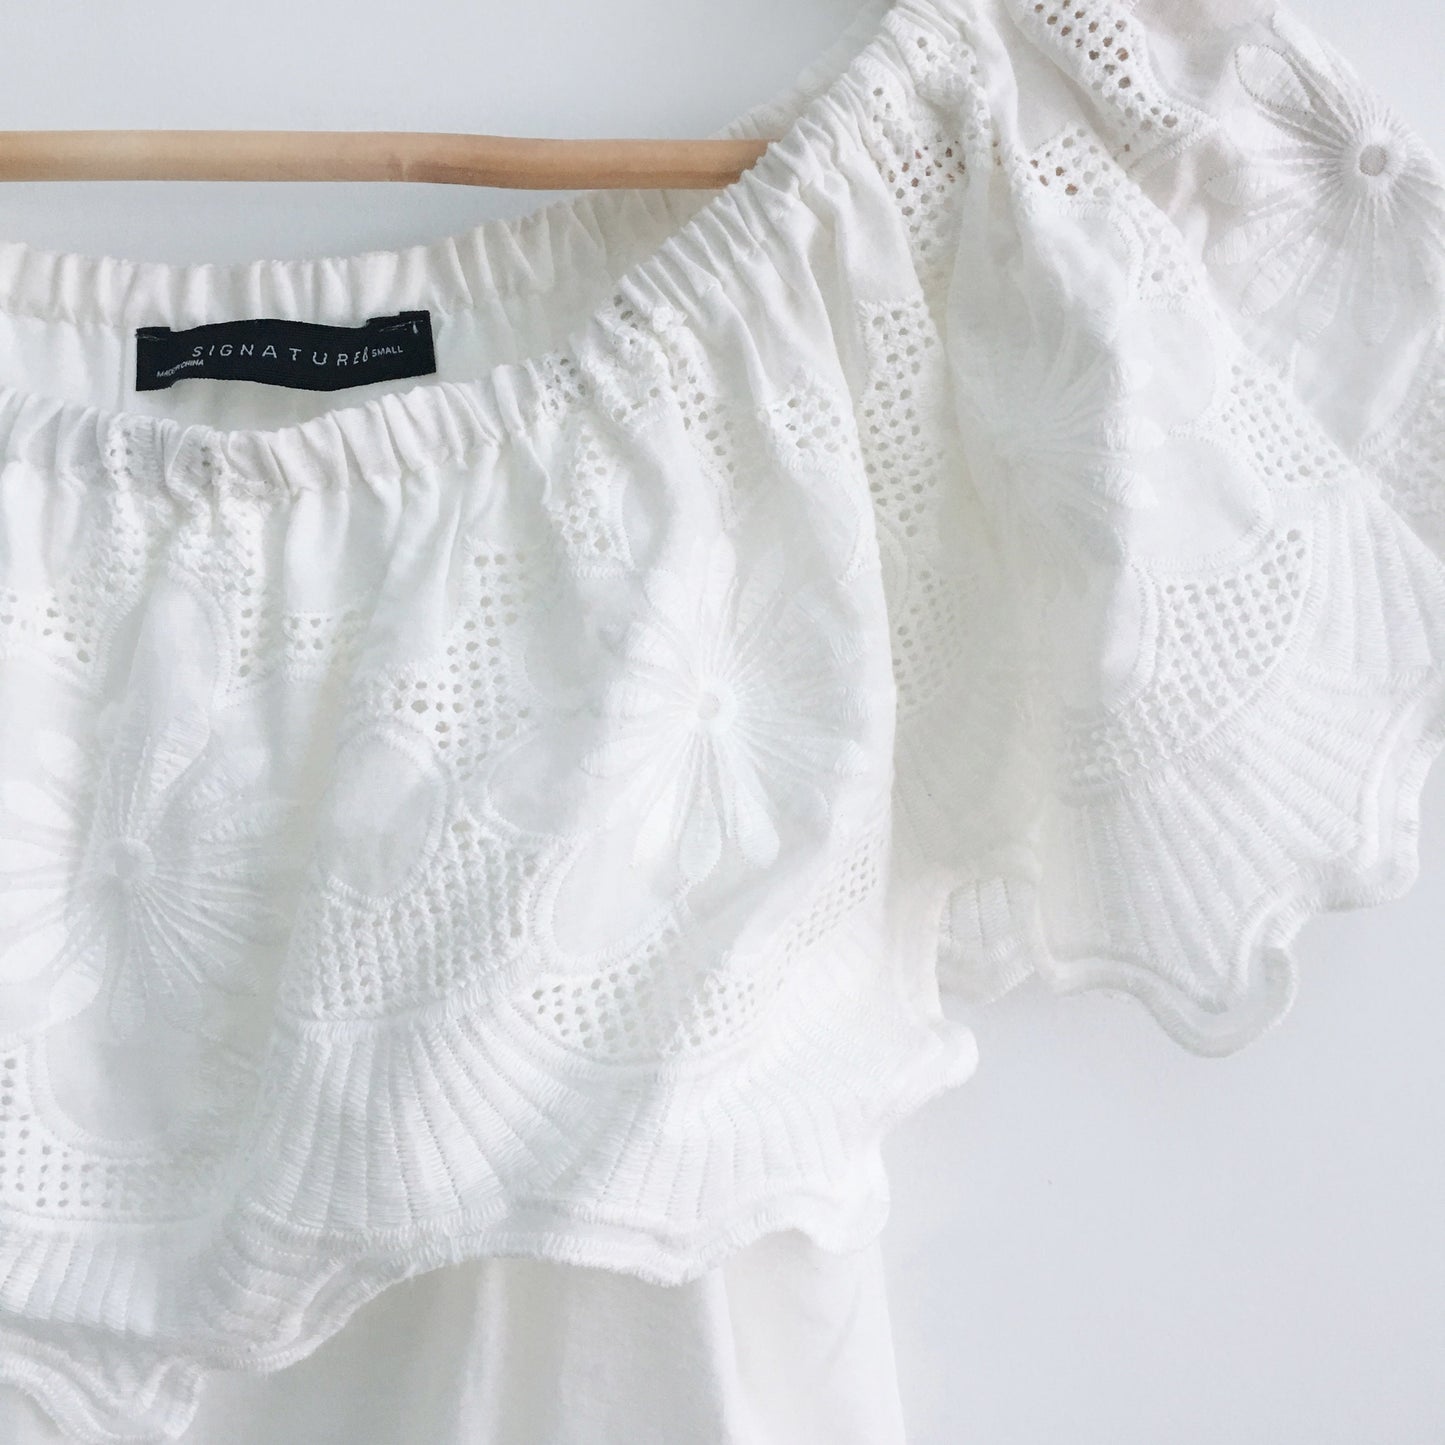 Signature 8 Off-Shoulder Crop with Ruffles - size Small